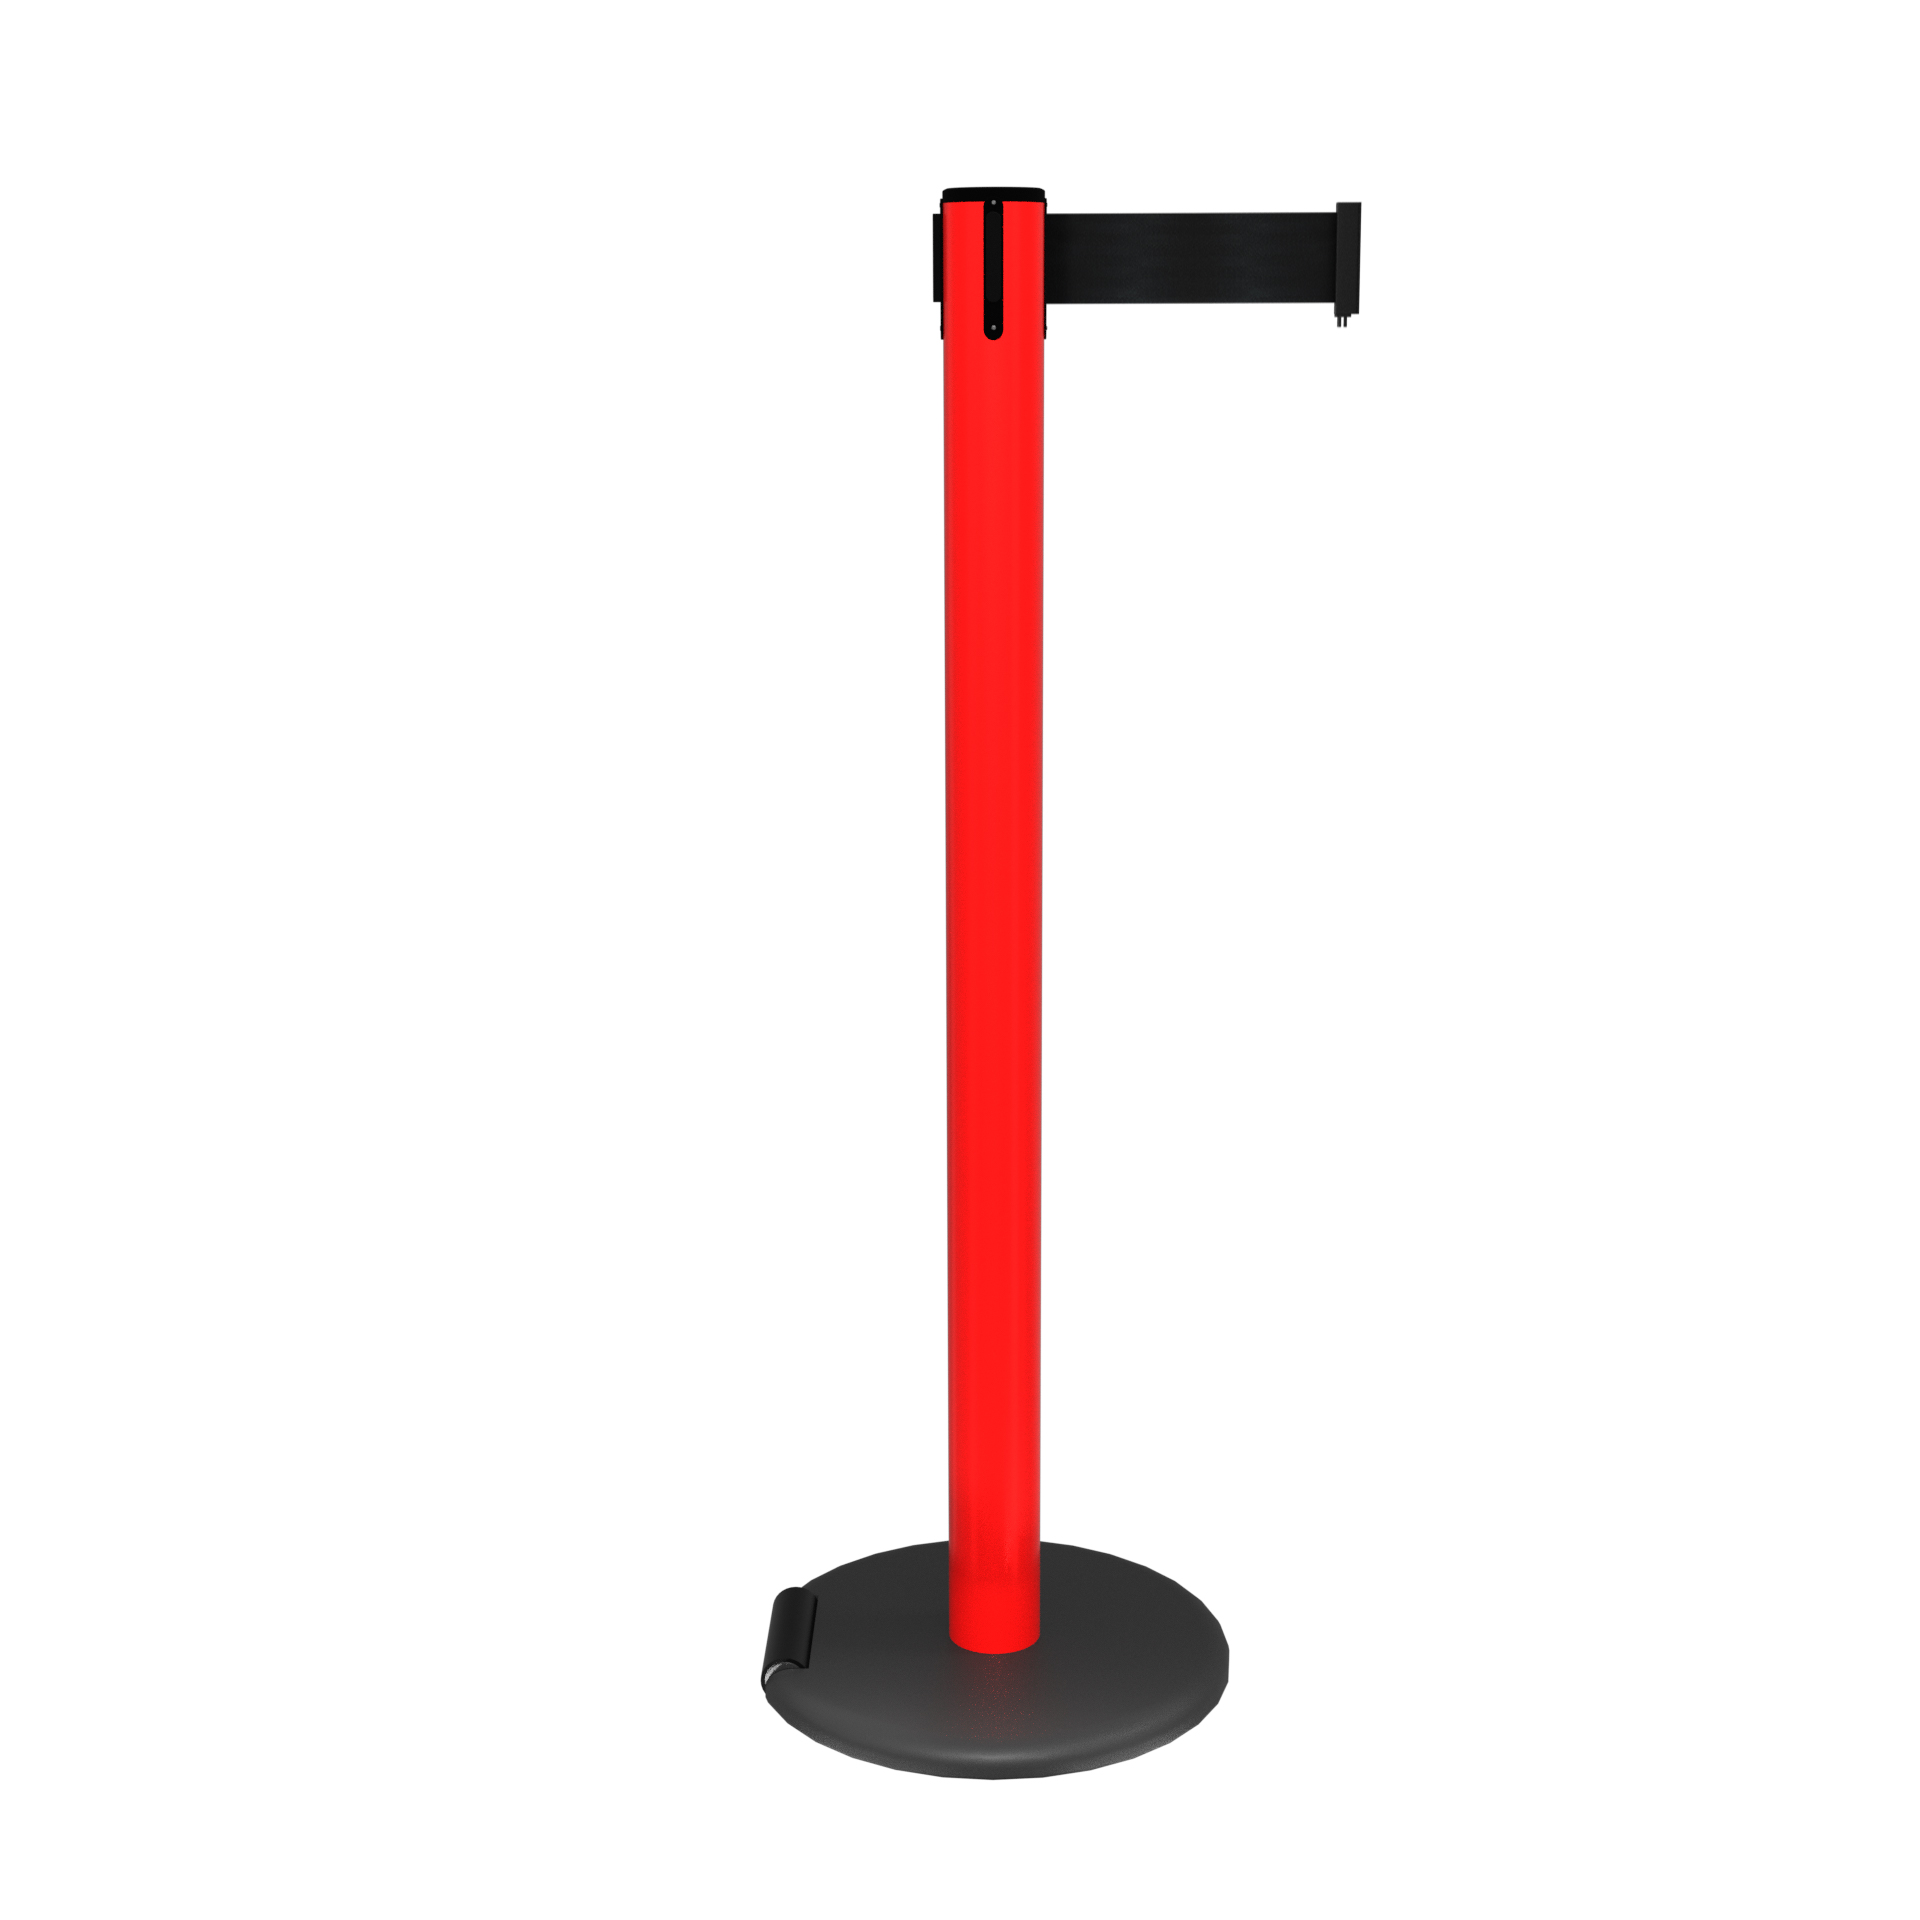 Red RollerSafety 250 Retractable Belt Barrier